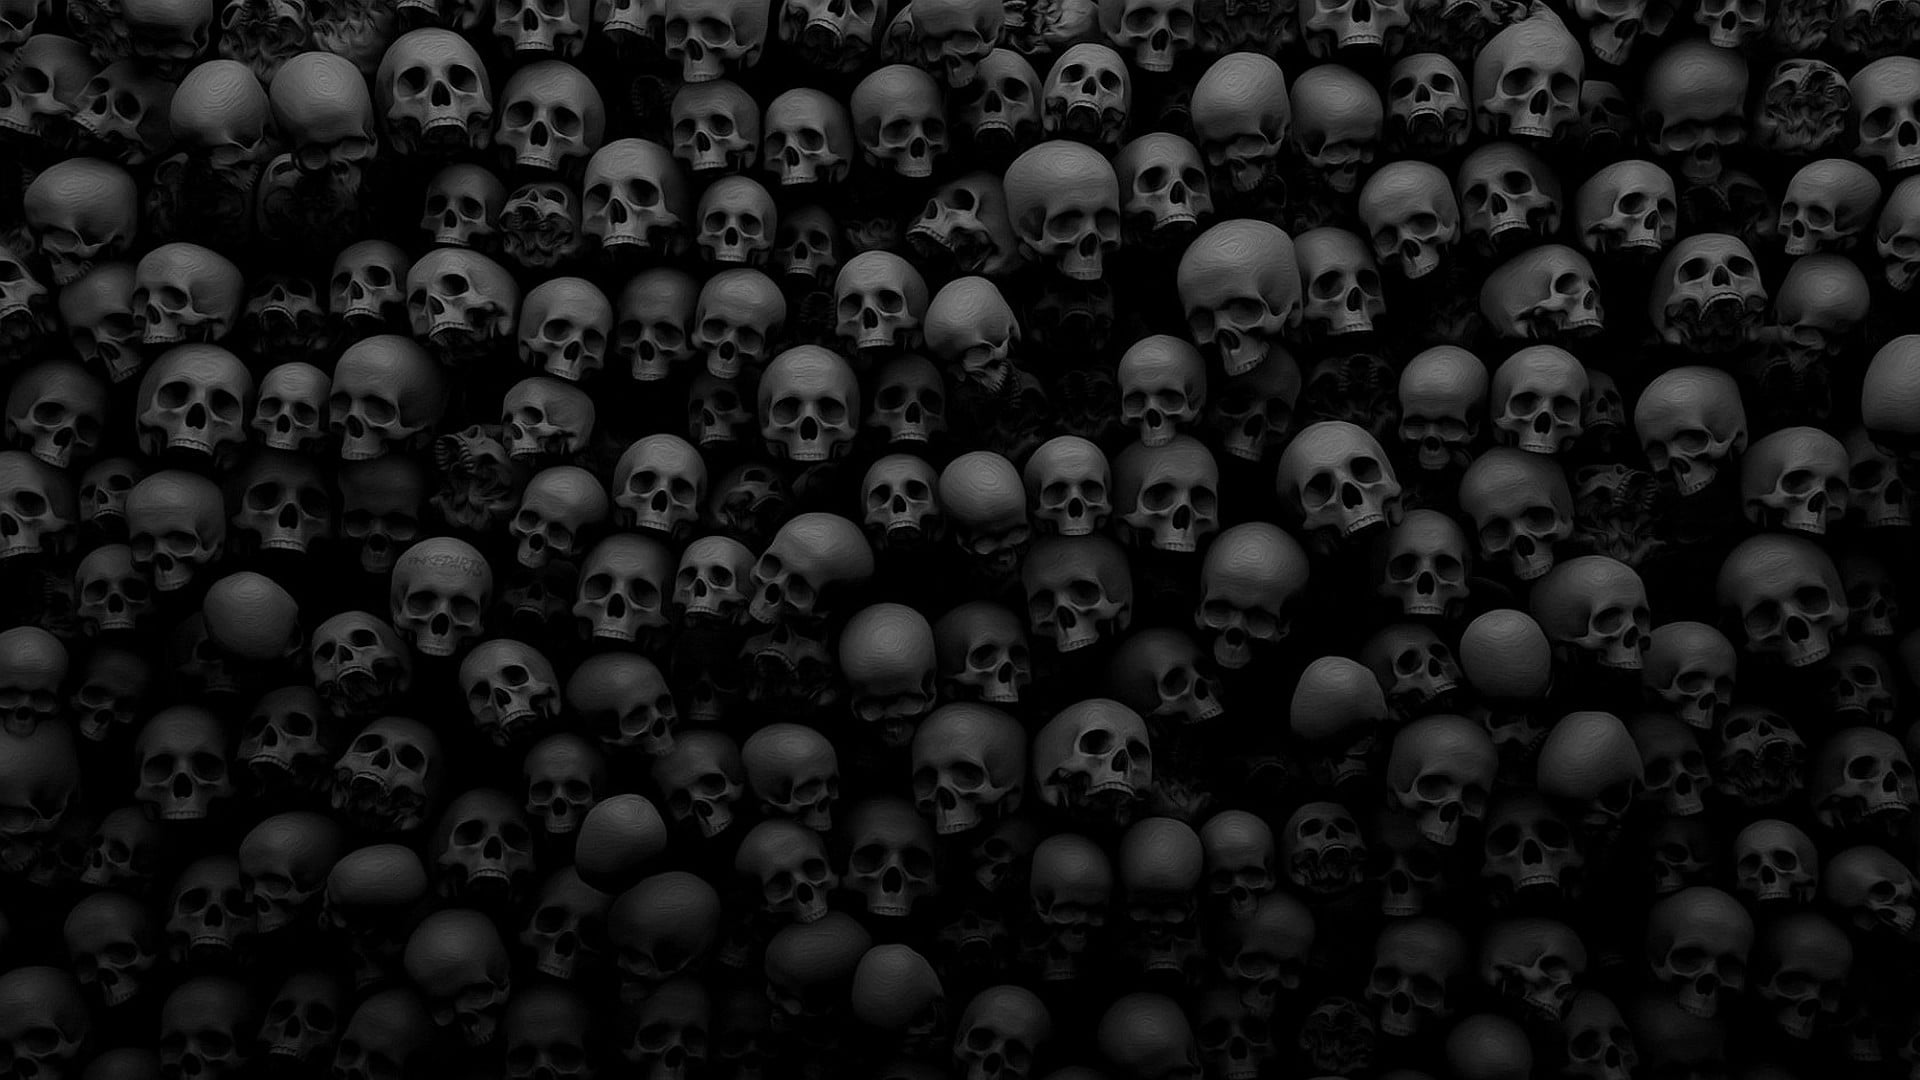 skulls wallpaper, monochrome, large group of objects, large group of people